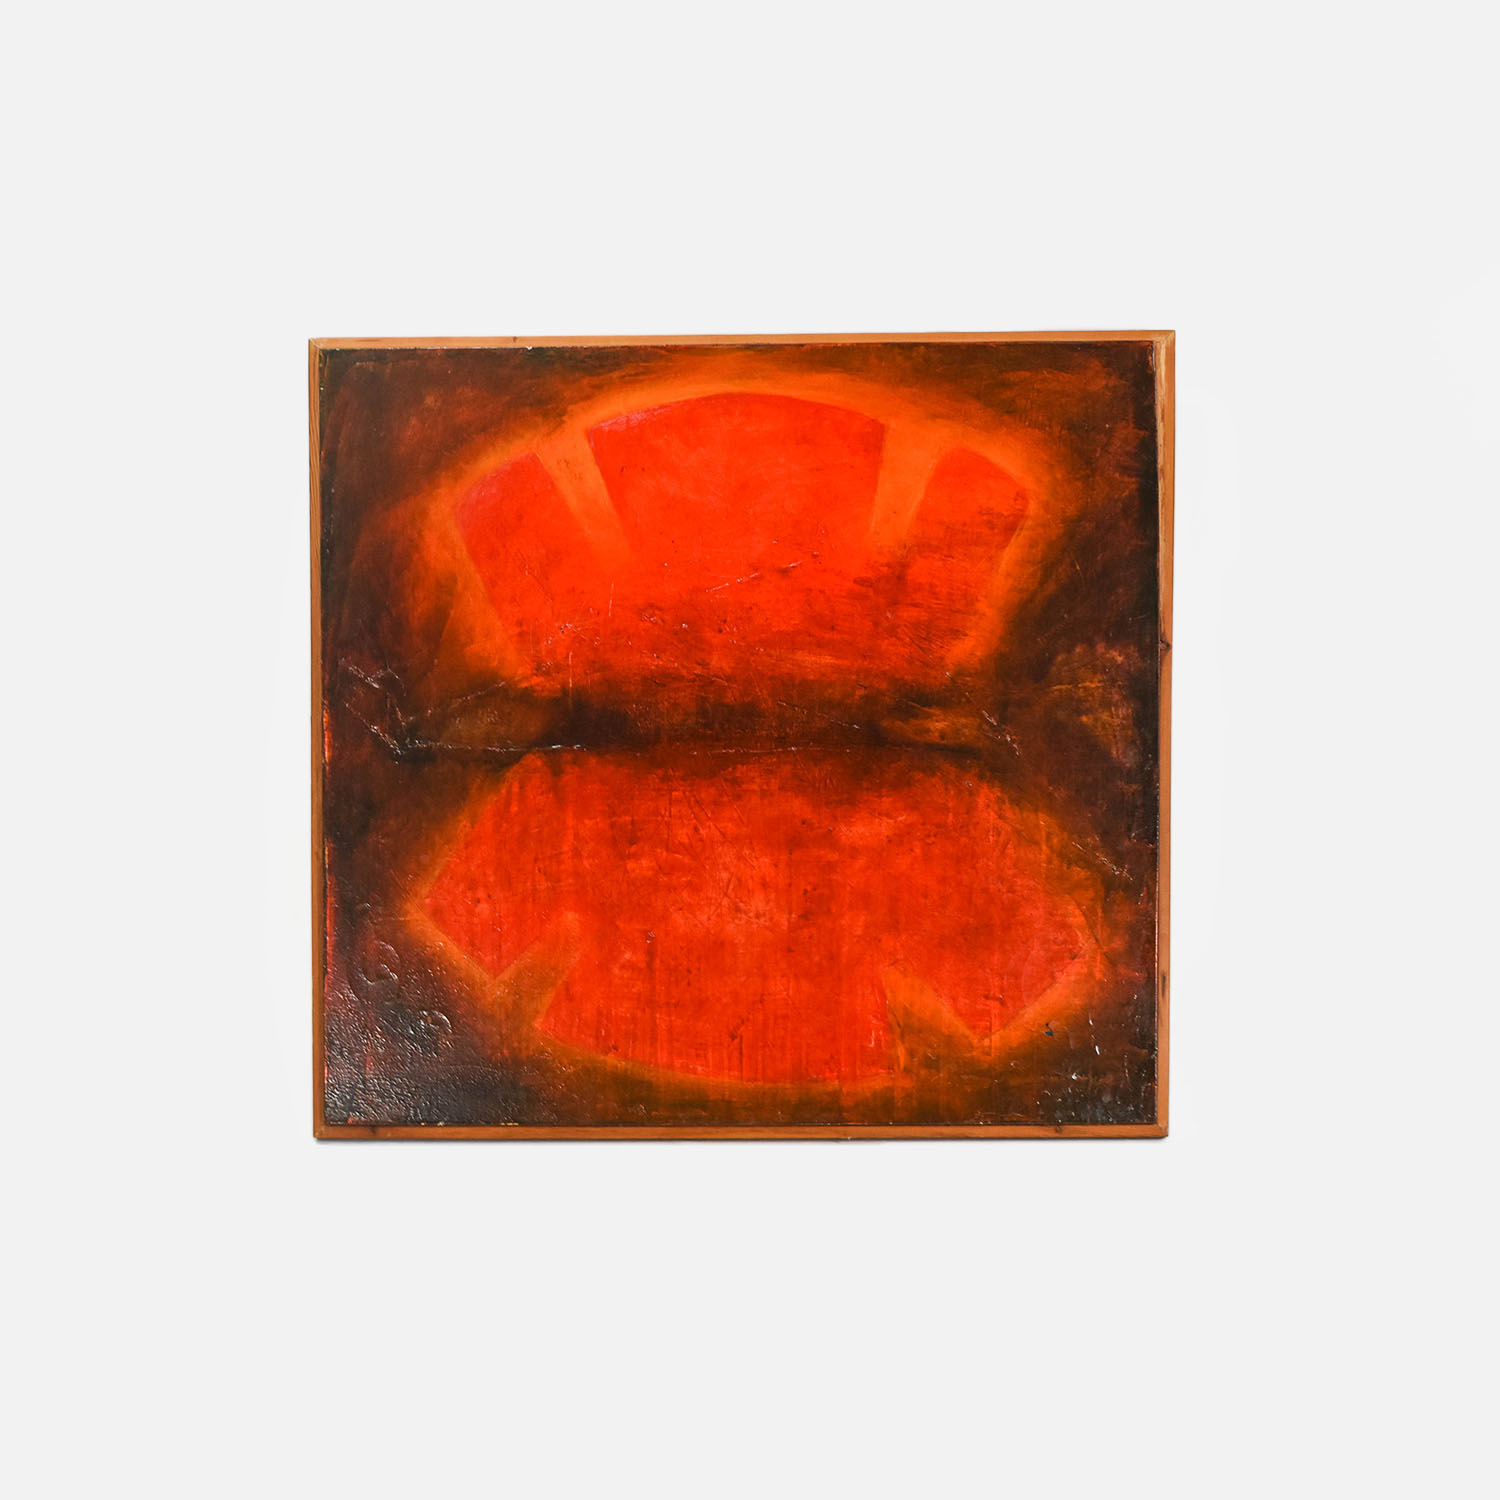 1960s Abstract Expressionist Orange and Red MCM Oil Painting on Canvas